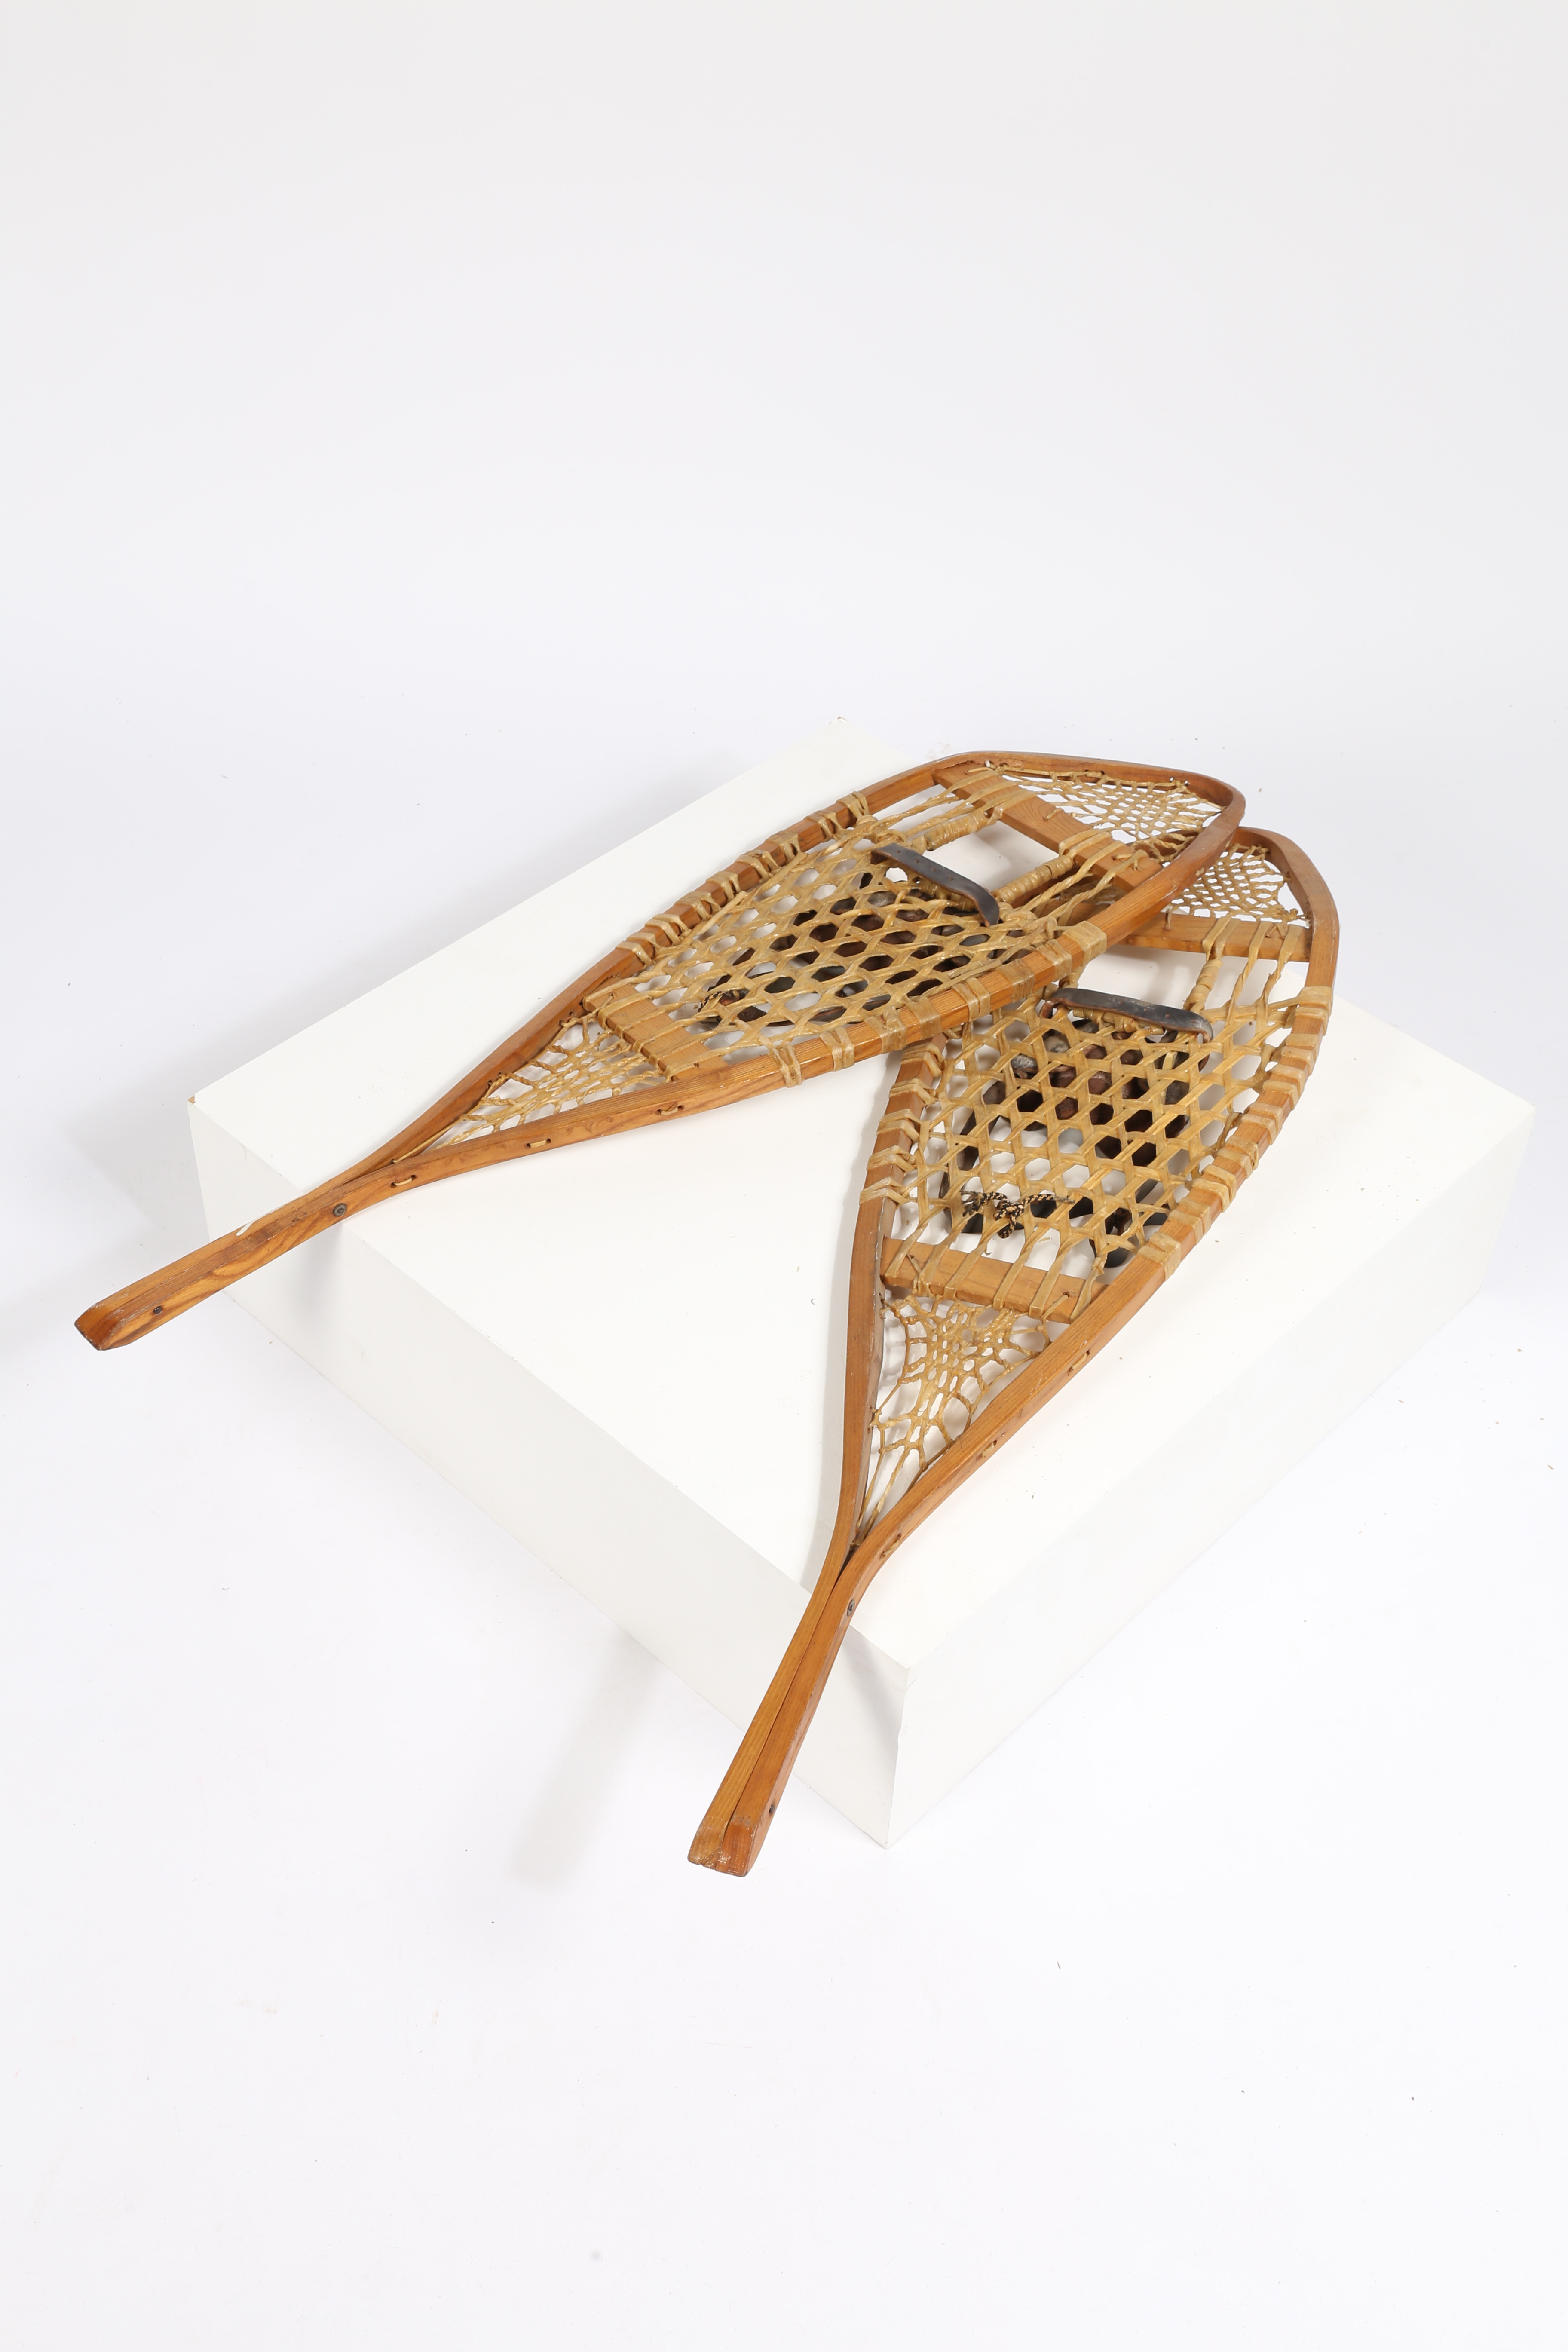 A PAIR OF EARLY 20TH CENTURY PINE RACKET SHAPED SNOW SHOES. - Image 7 of 7